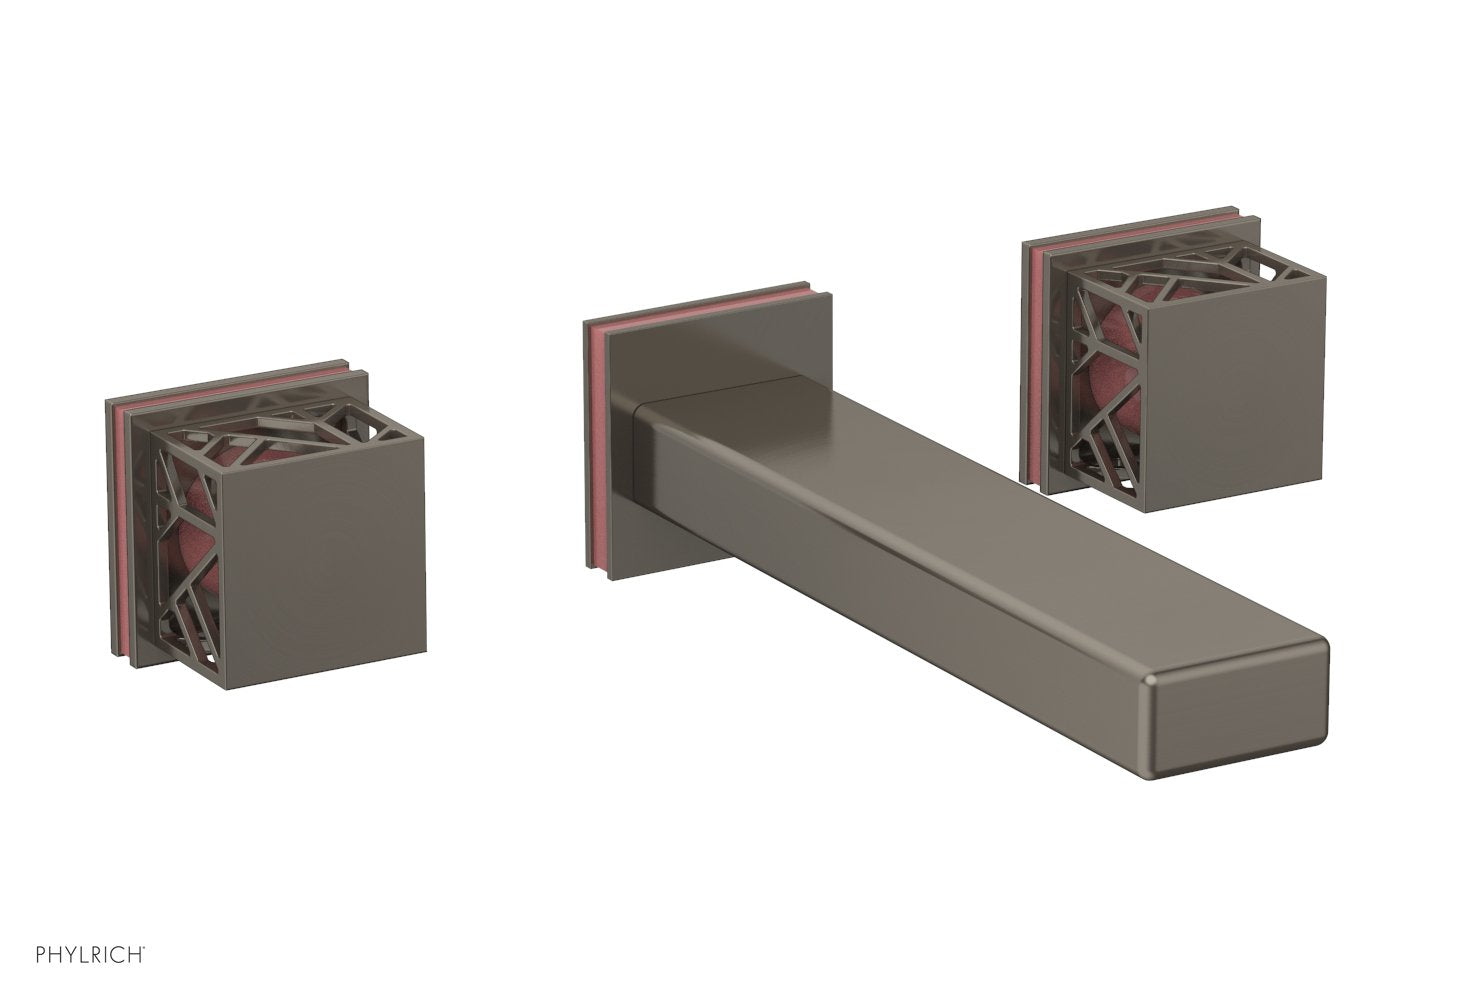 Phylrich JOLIE Wall Lavatory Set - Square Handles with "Pink" Accents